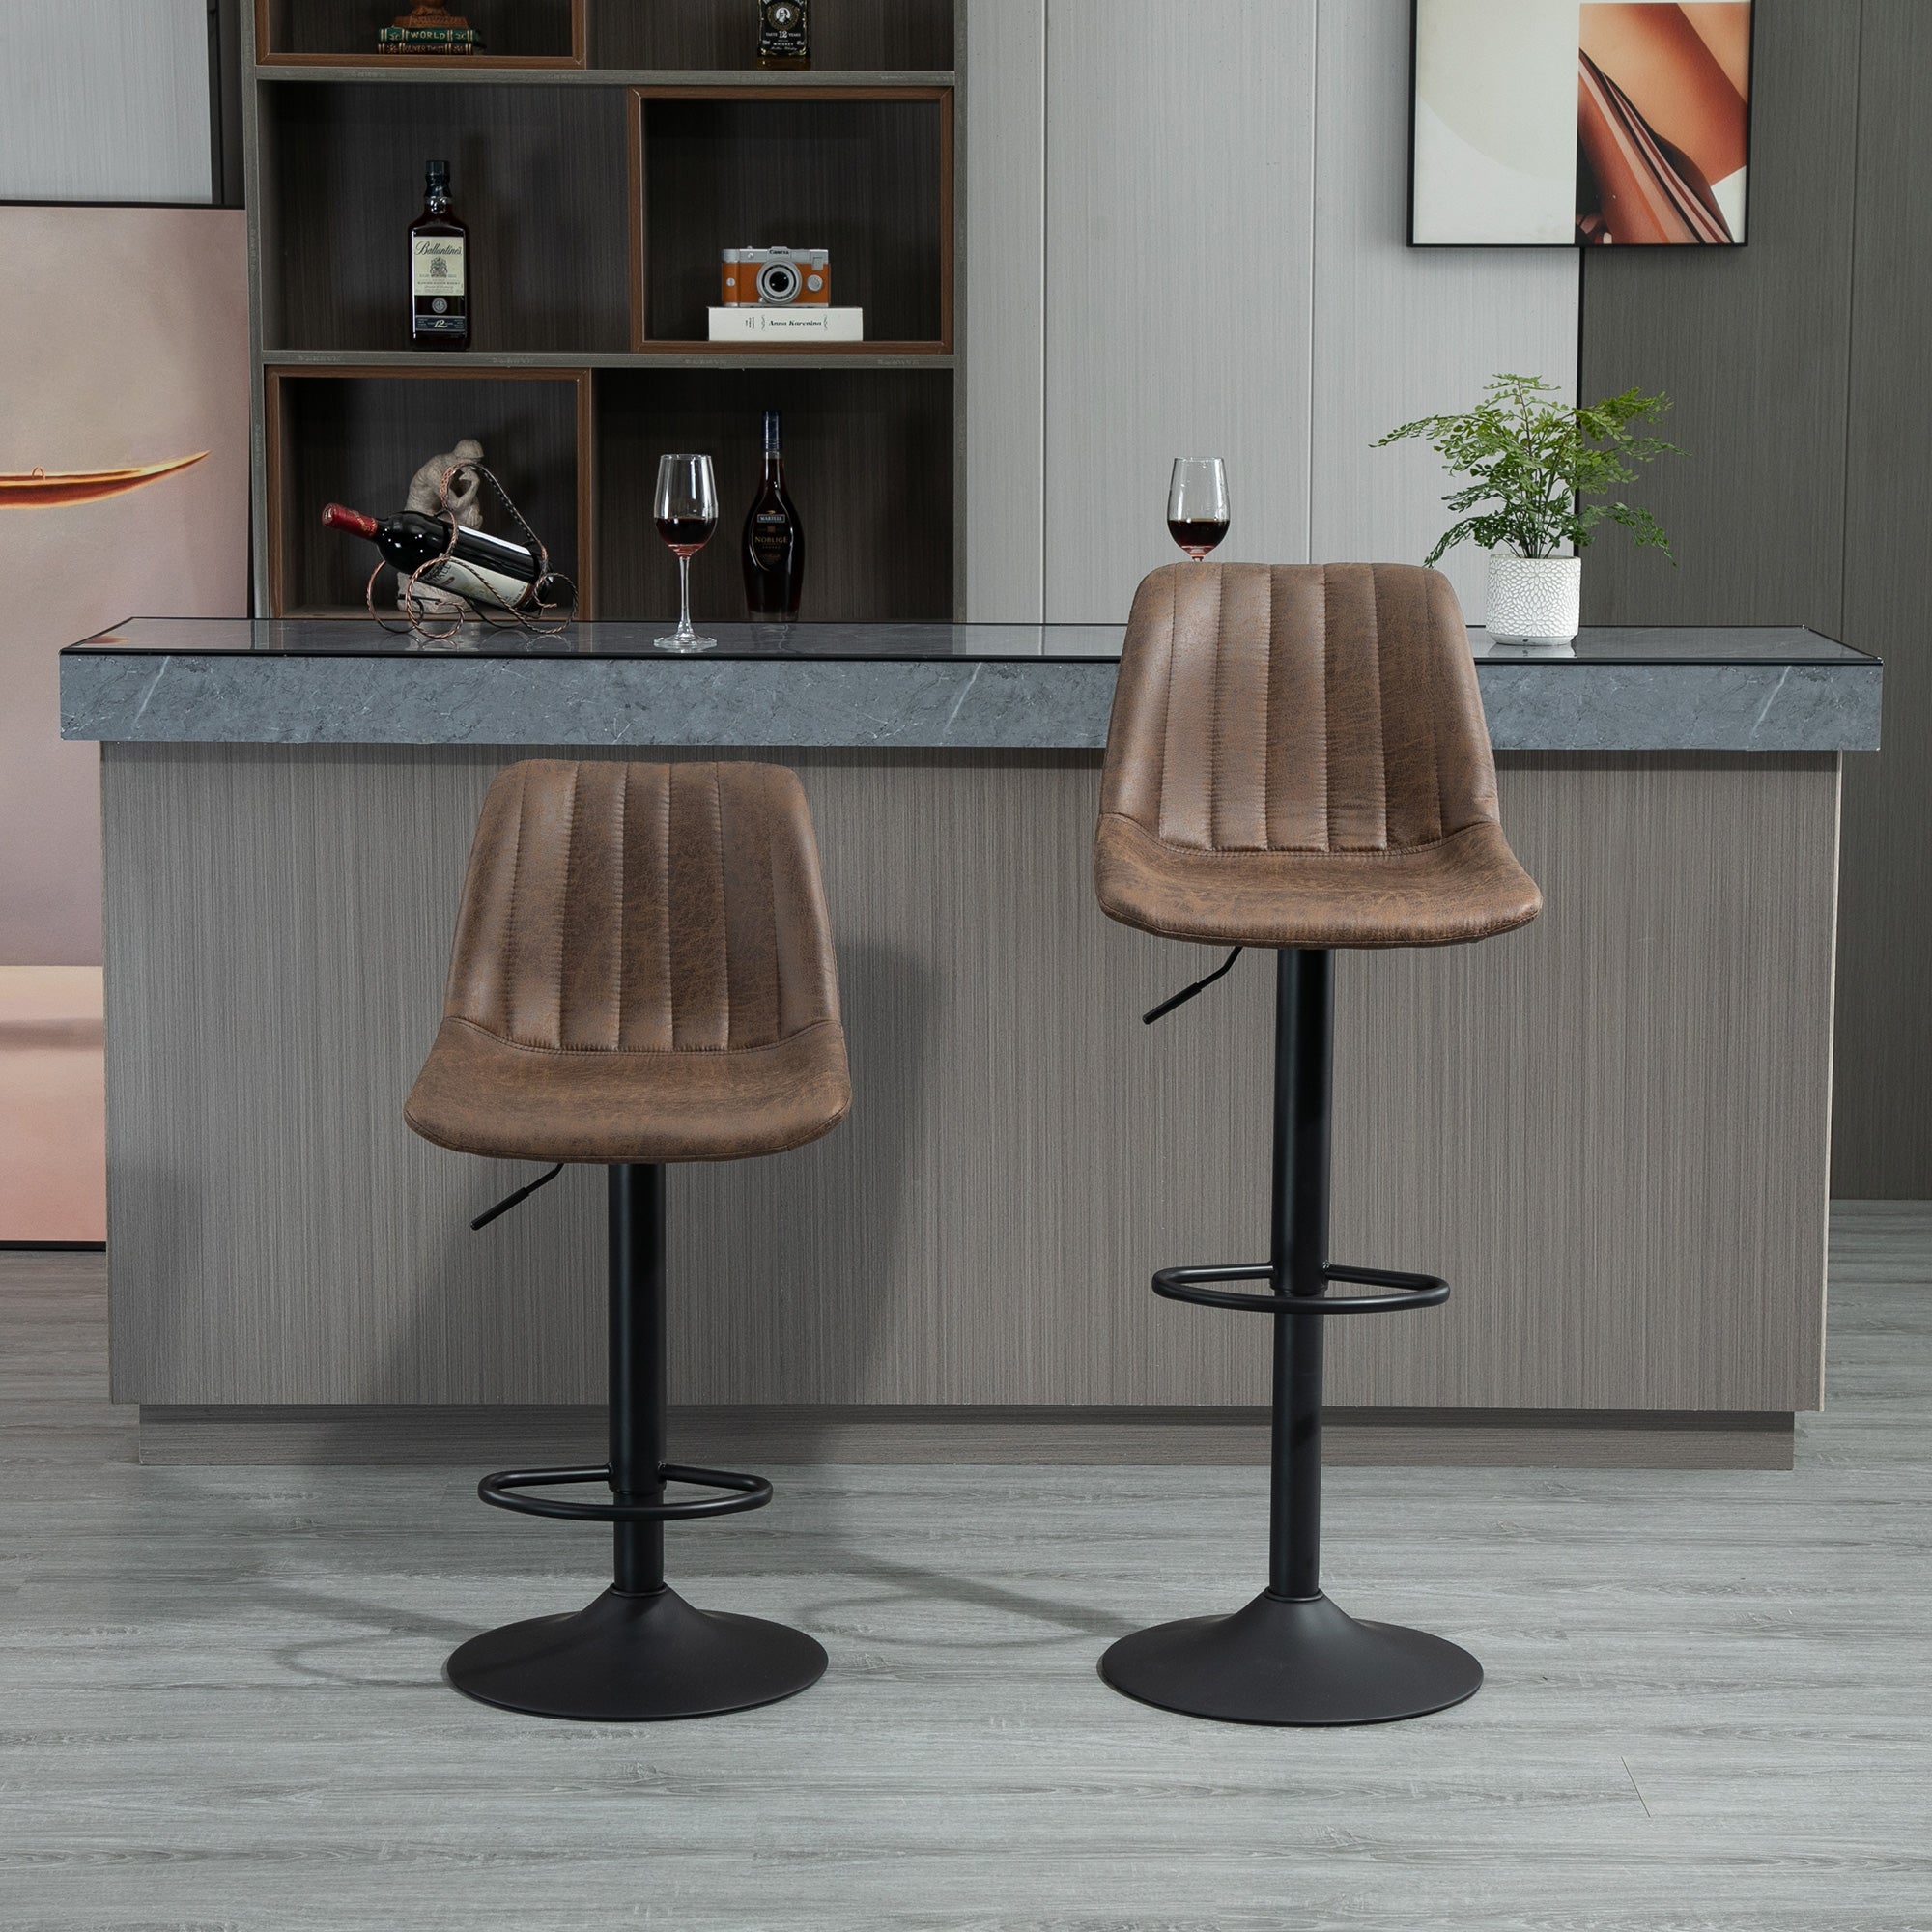 Adjustable Bar Stools Set of 2, Microfiber Swivel Barstools with Back and Footrest, Upholstered Bar Chairs for Kitchen, Dining Room, Home Pub, Brown Bar Stools   at Gallery Canada